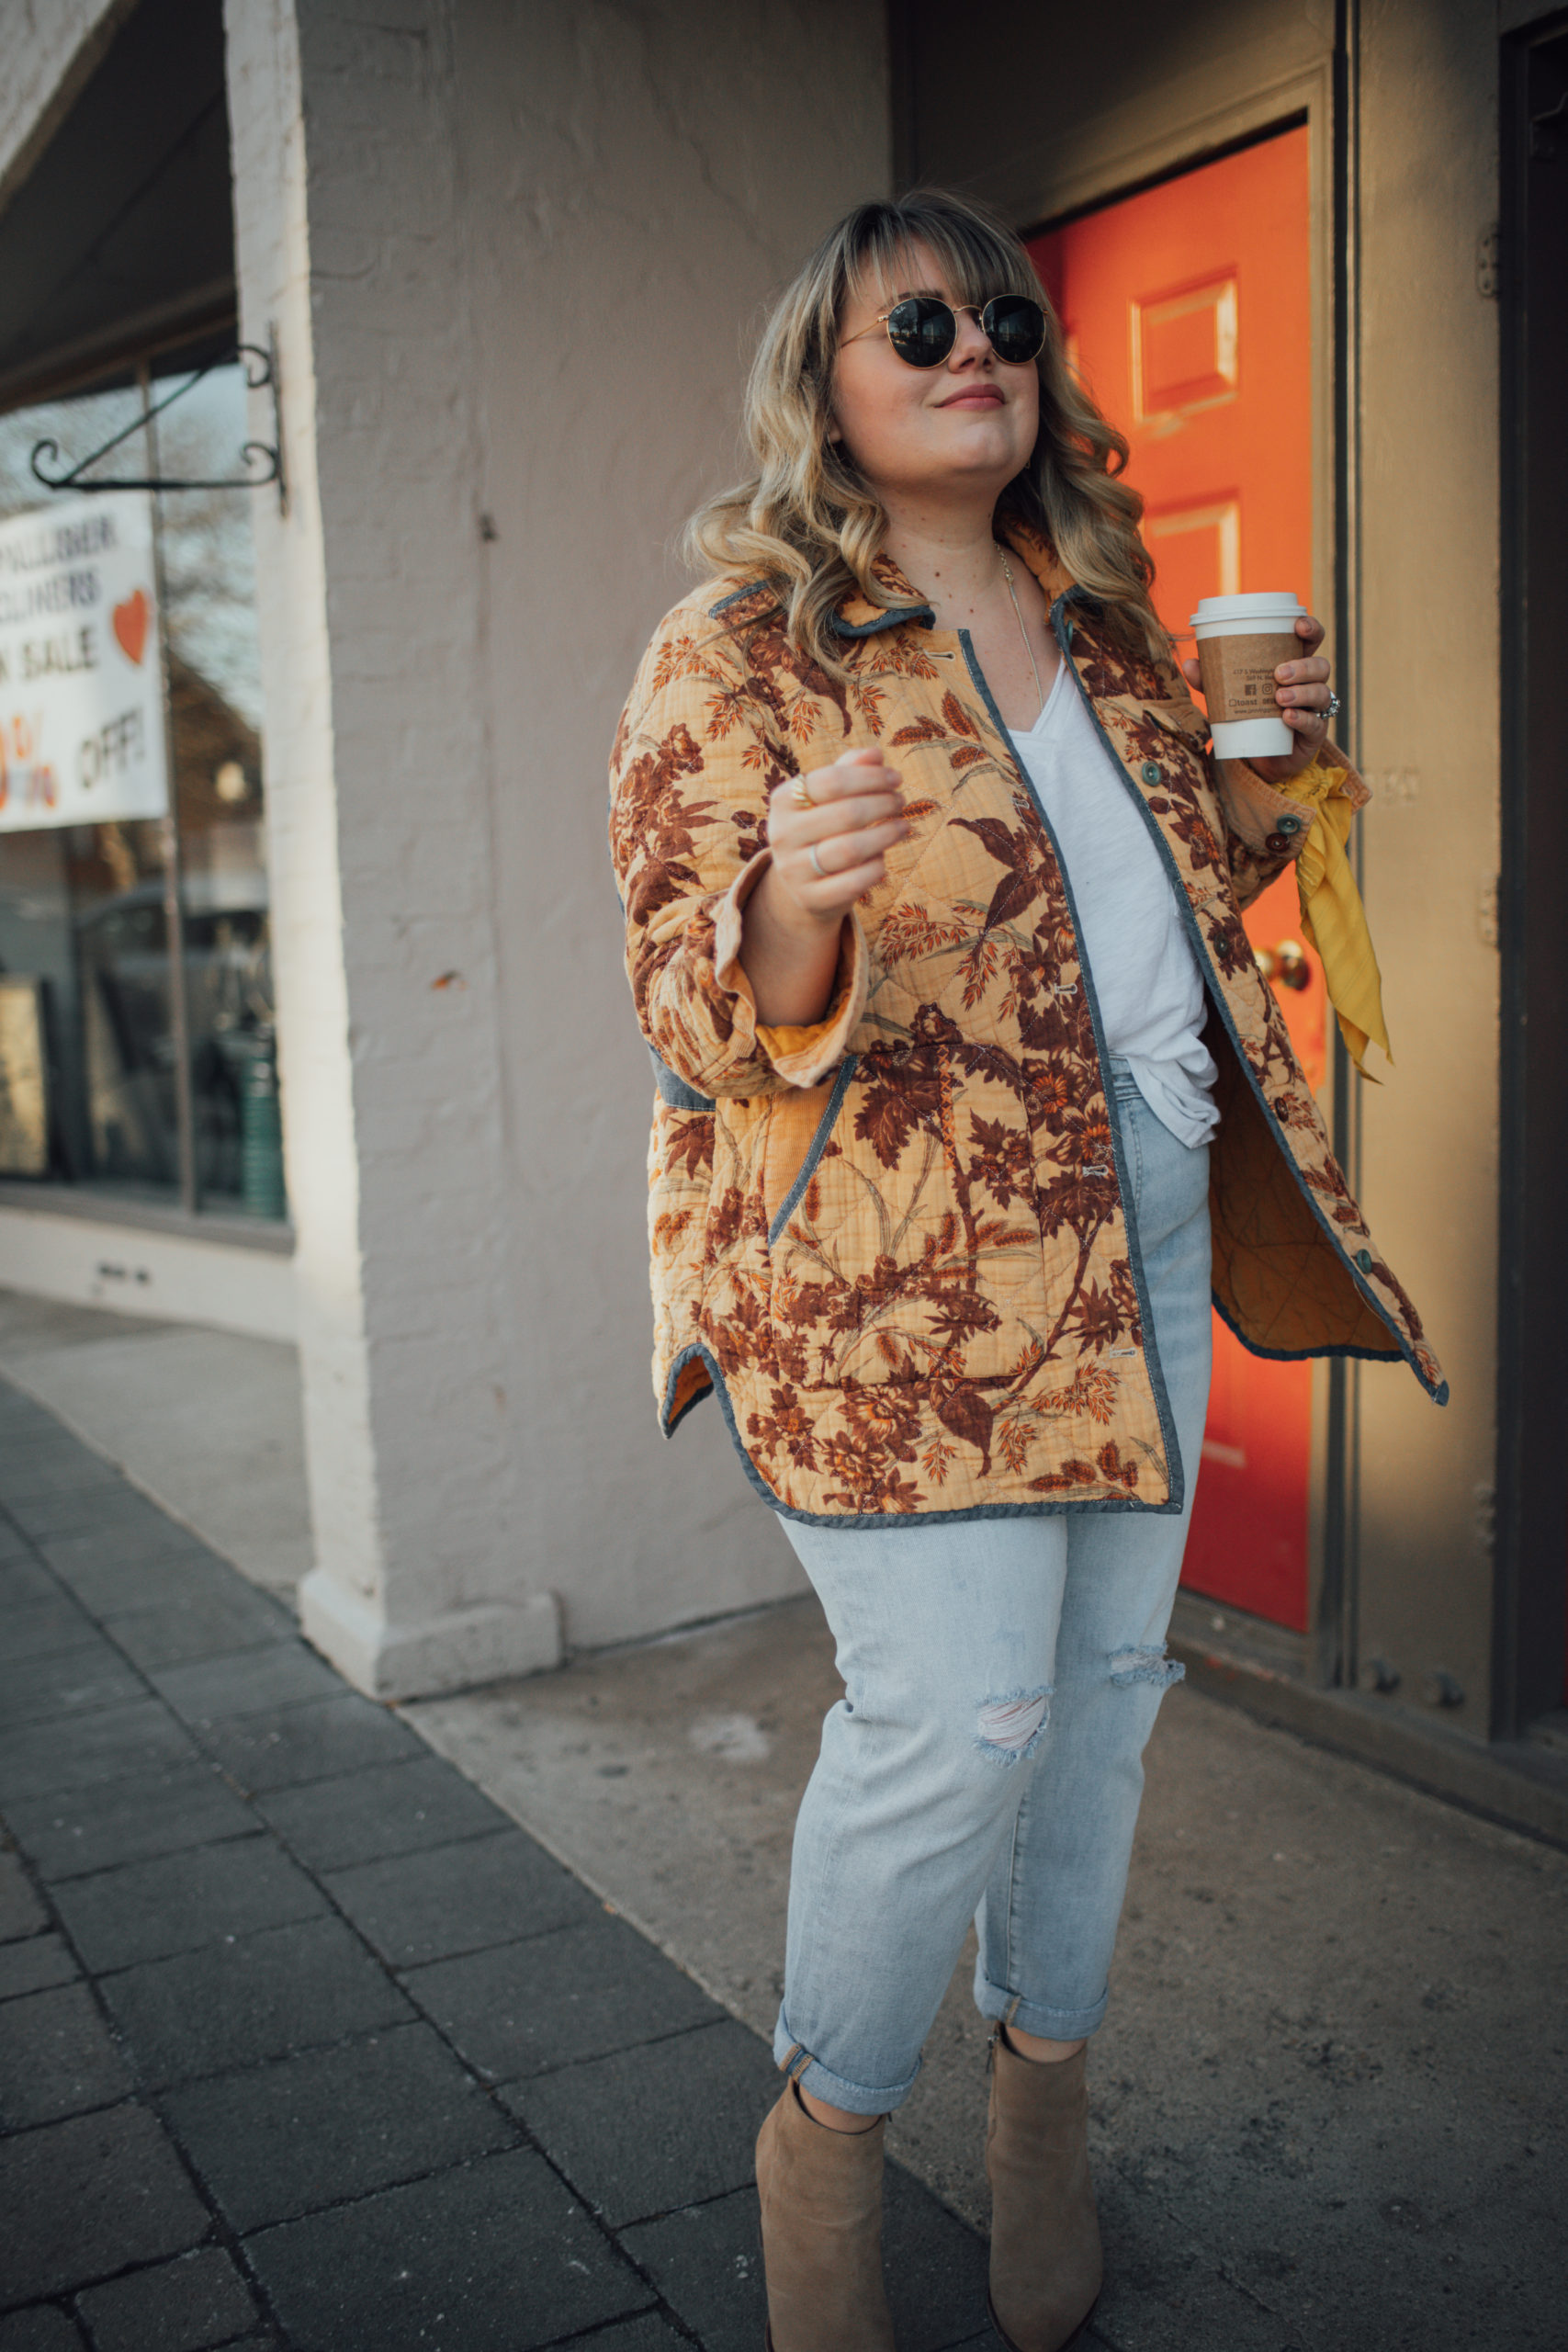 Sharing a roundup of Boho Spring Jackets from plus size retailers. Spring means lighter layers and getting outside more, boho chic style. 